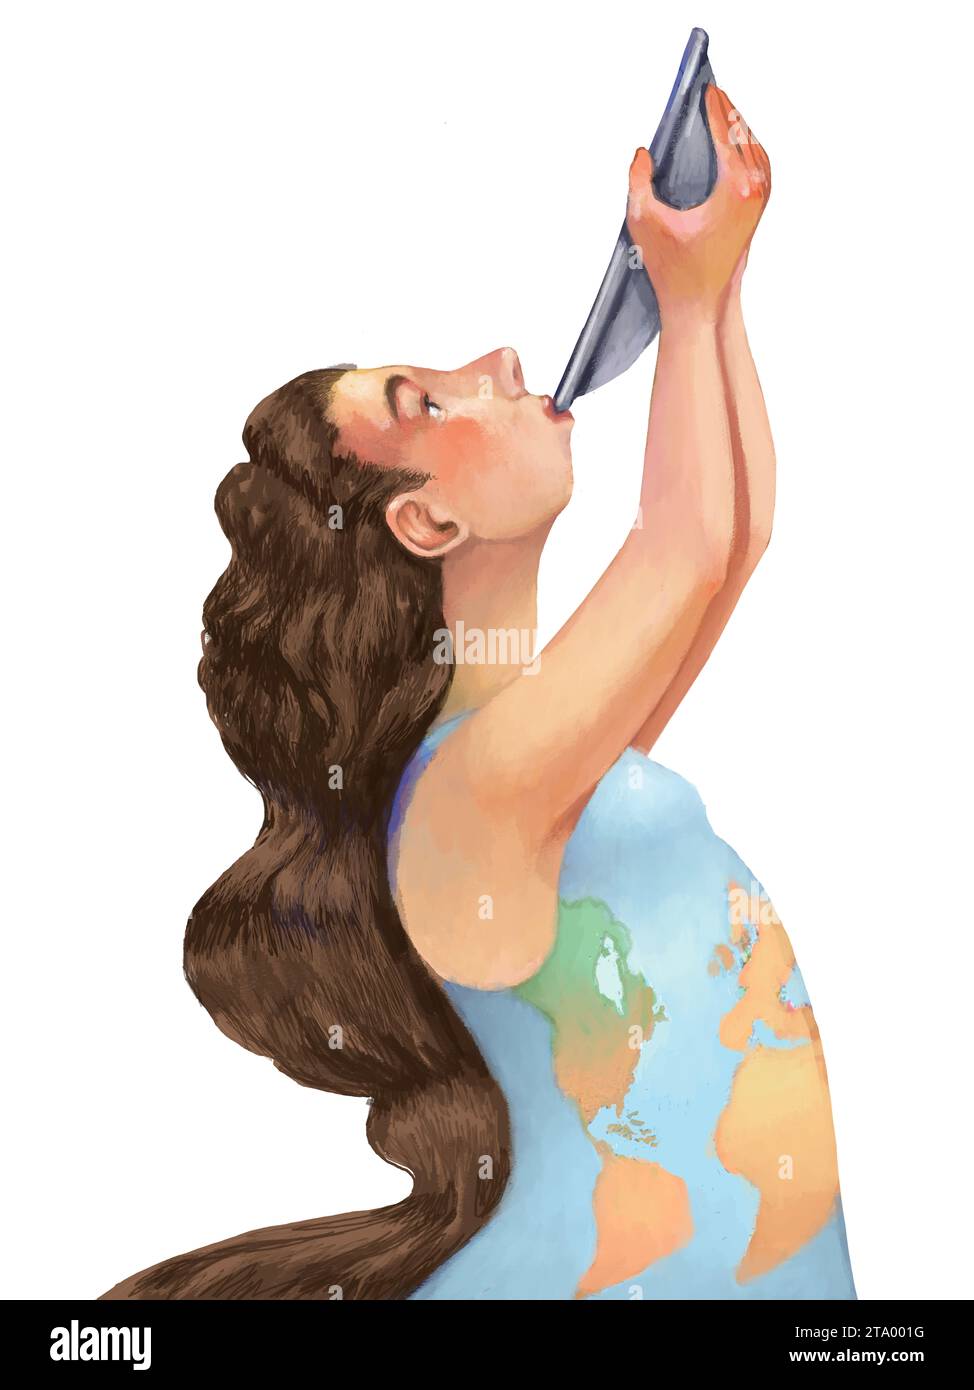 A woman in profile as she eats from a plate and on her dress is drawn a map of the world, a metaphor for the women's nutrition program concept Stock Photo